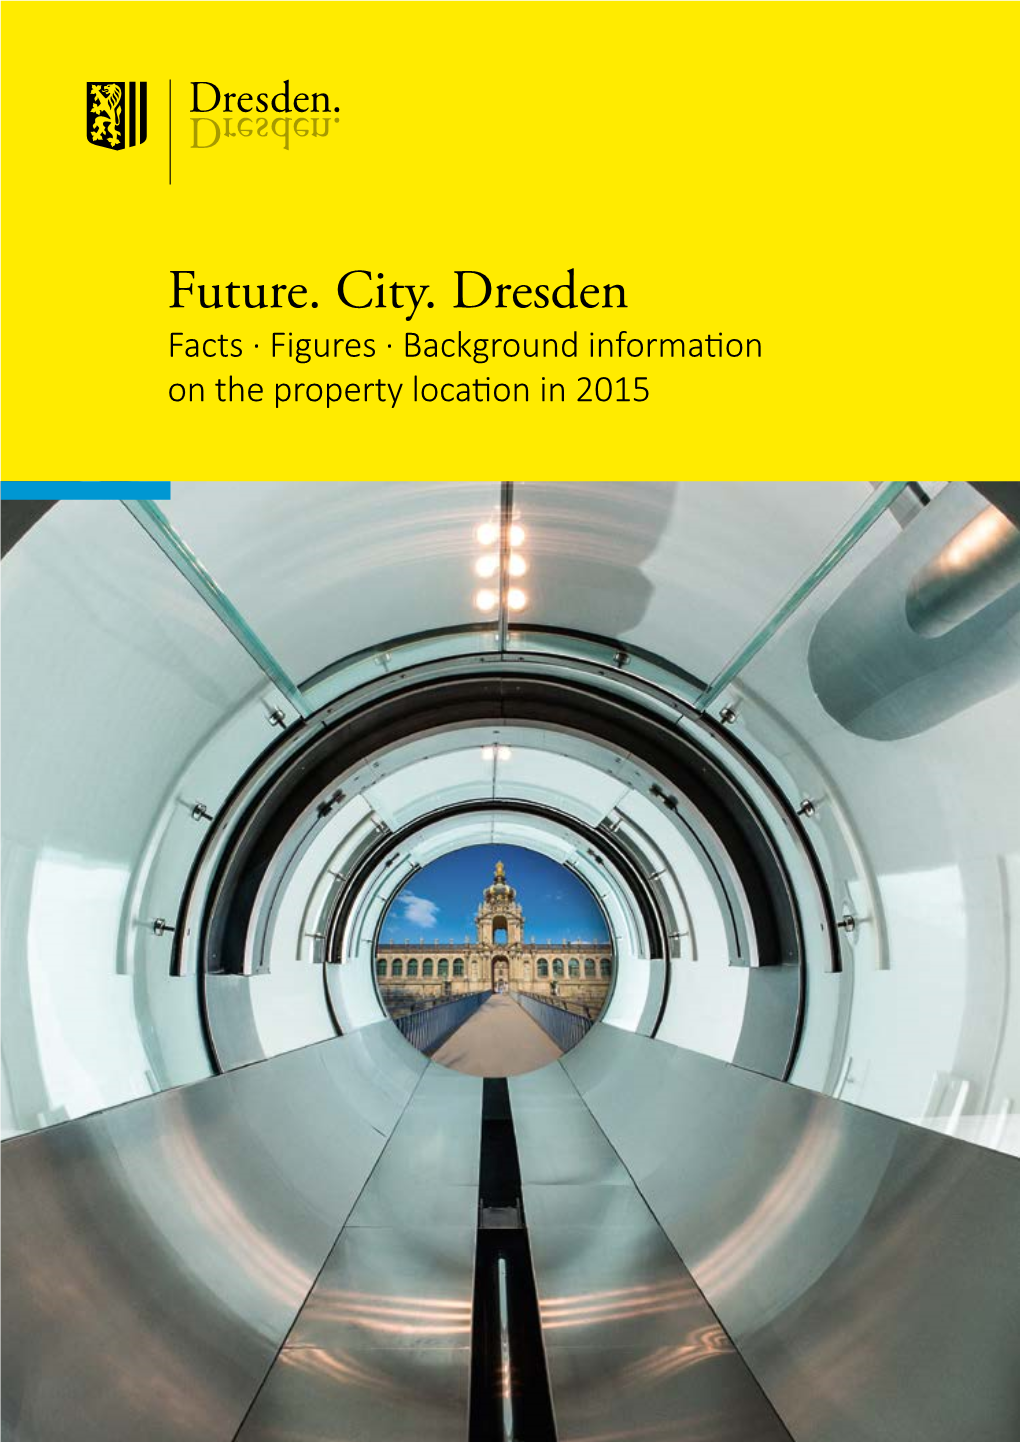 Future. City. Dresden – Facts, Figures, Background Information On